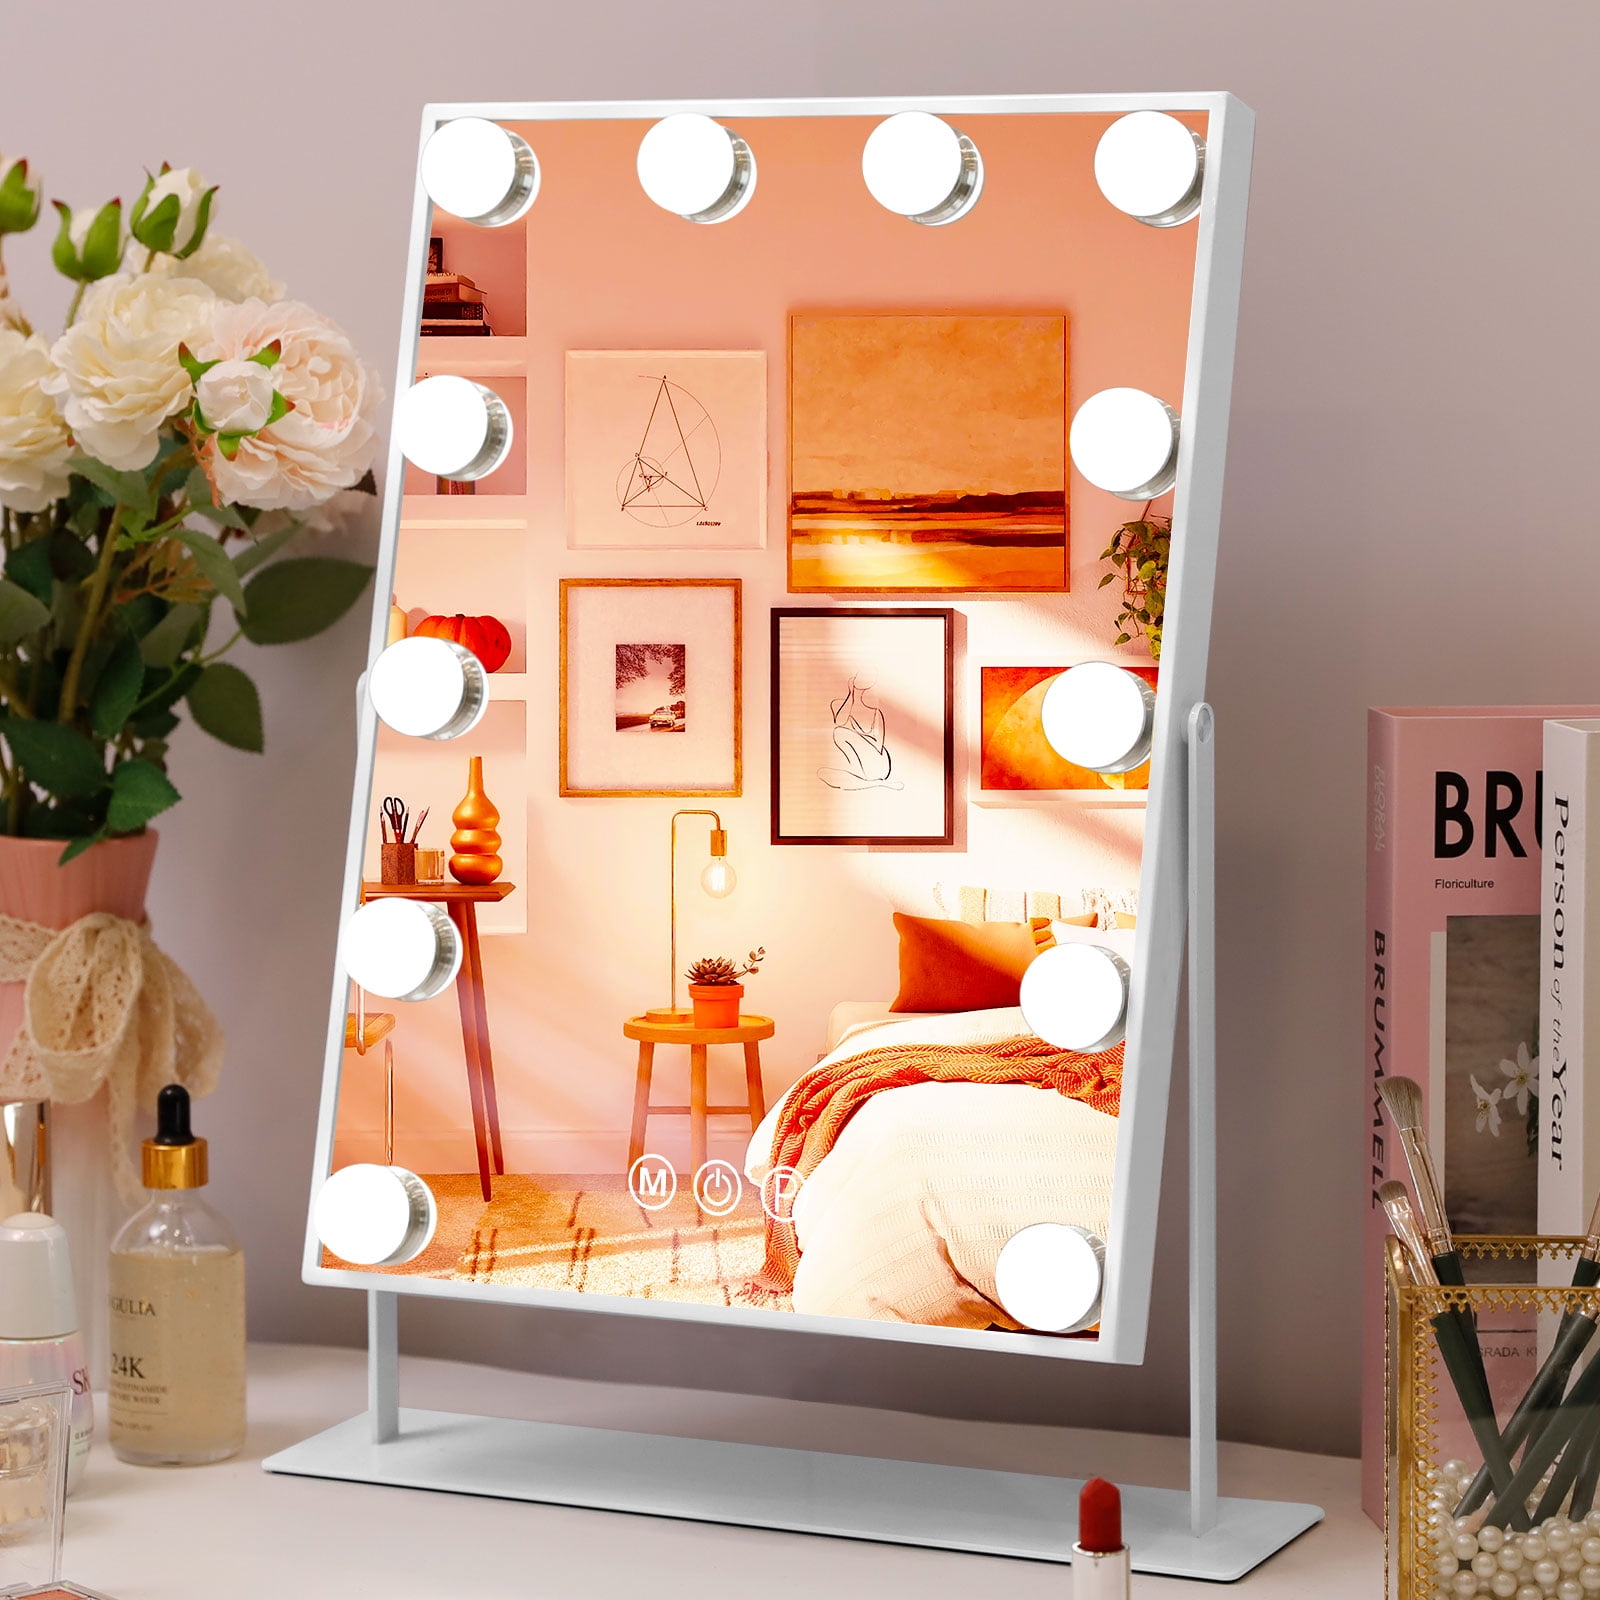 Fenair Vanity Mirror with Lights and Bluetooth Hollywood Speaker Support  Answer Call, Touch Screen, 3 Color Modes Tabletop 15 Dimmable Bulbs